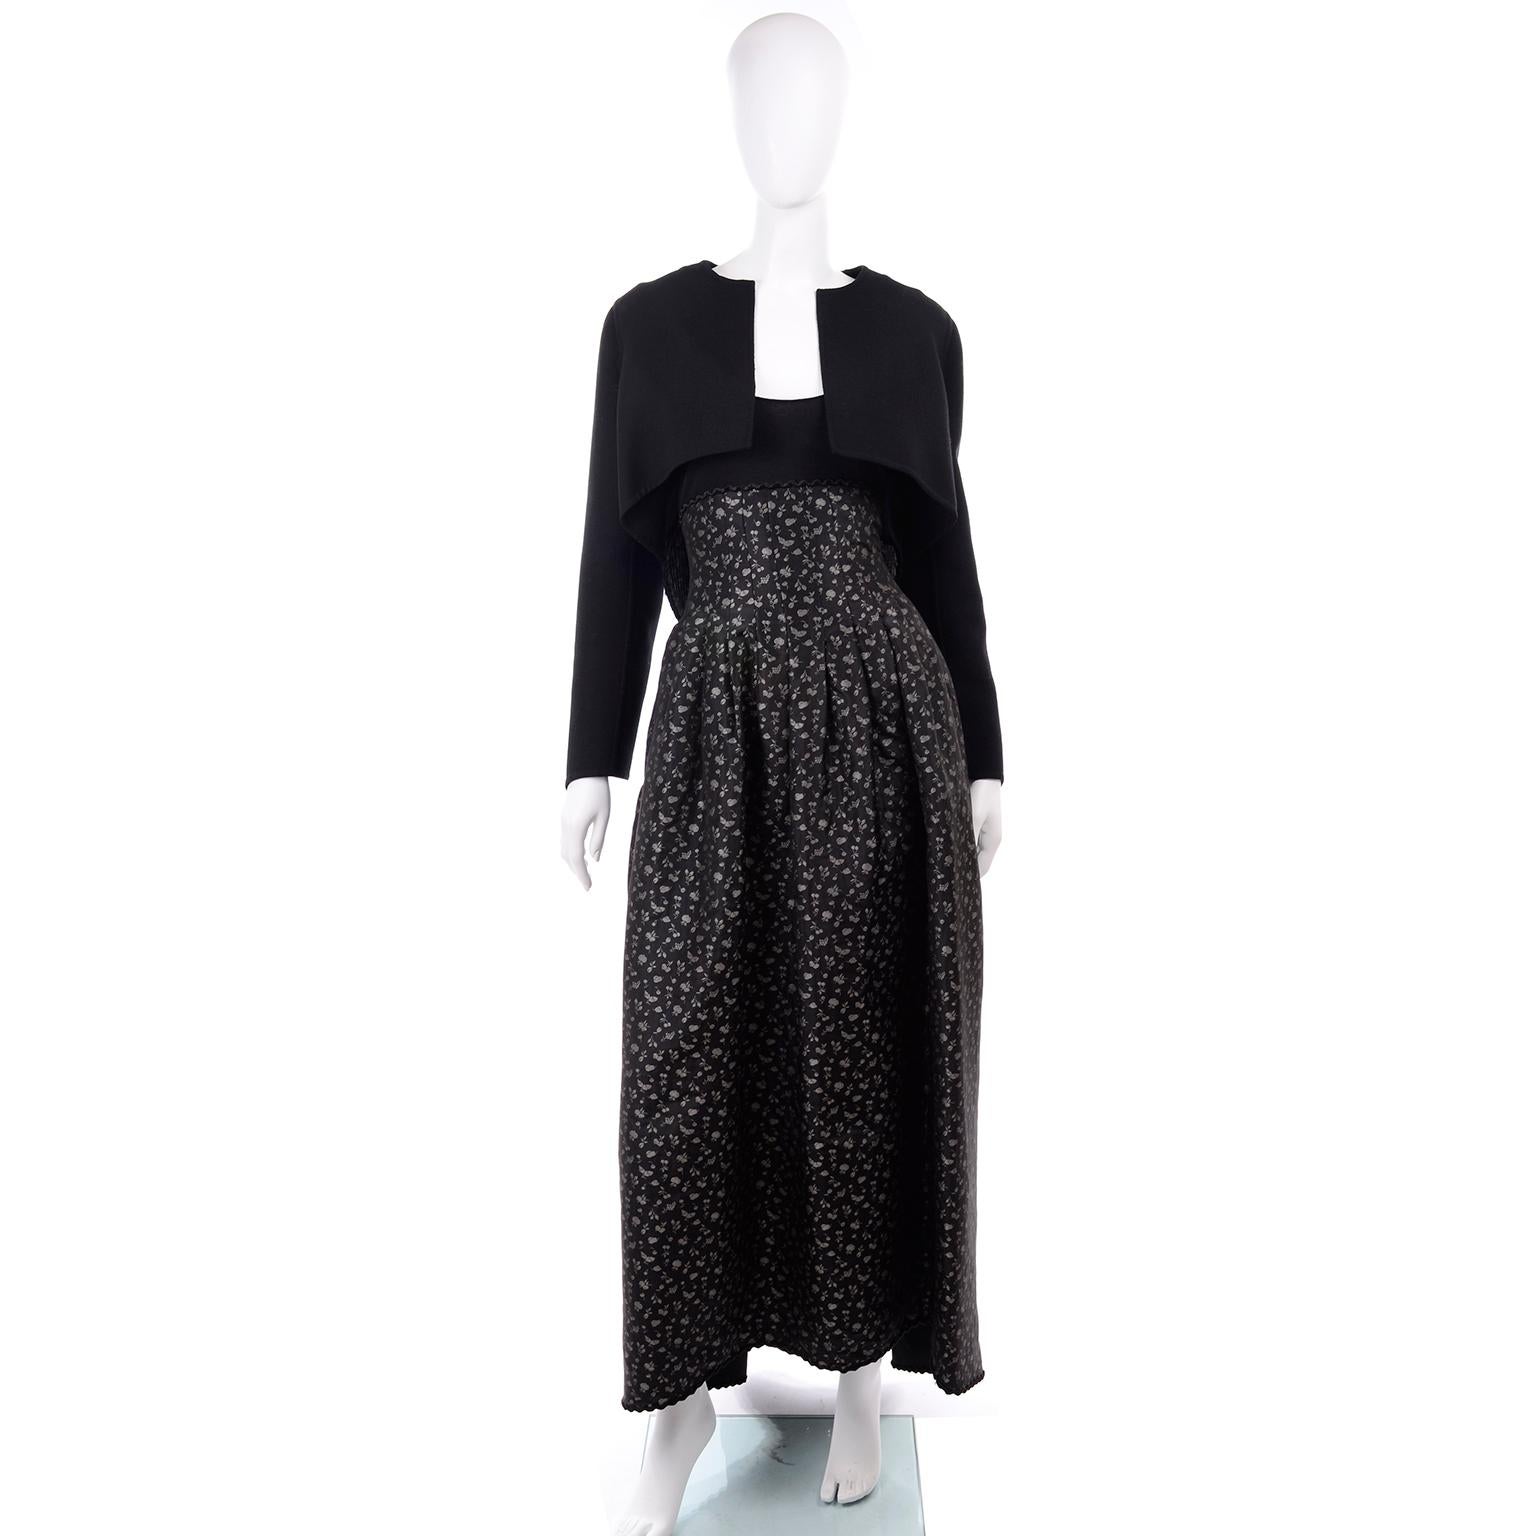 This is an archival Geoffrey Beene vintage outfit from the 1980's that includes a long dress and a bolero style jacket with tassels.  The dress has a solid black knit bodice with long sleeves with hook and eye & zipper closures, a scoop neck and a